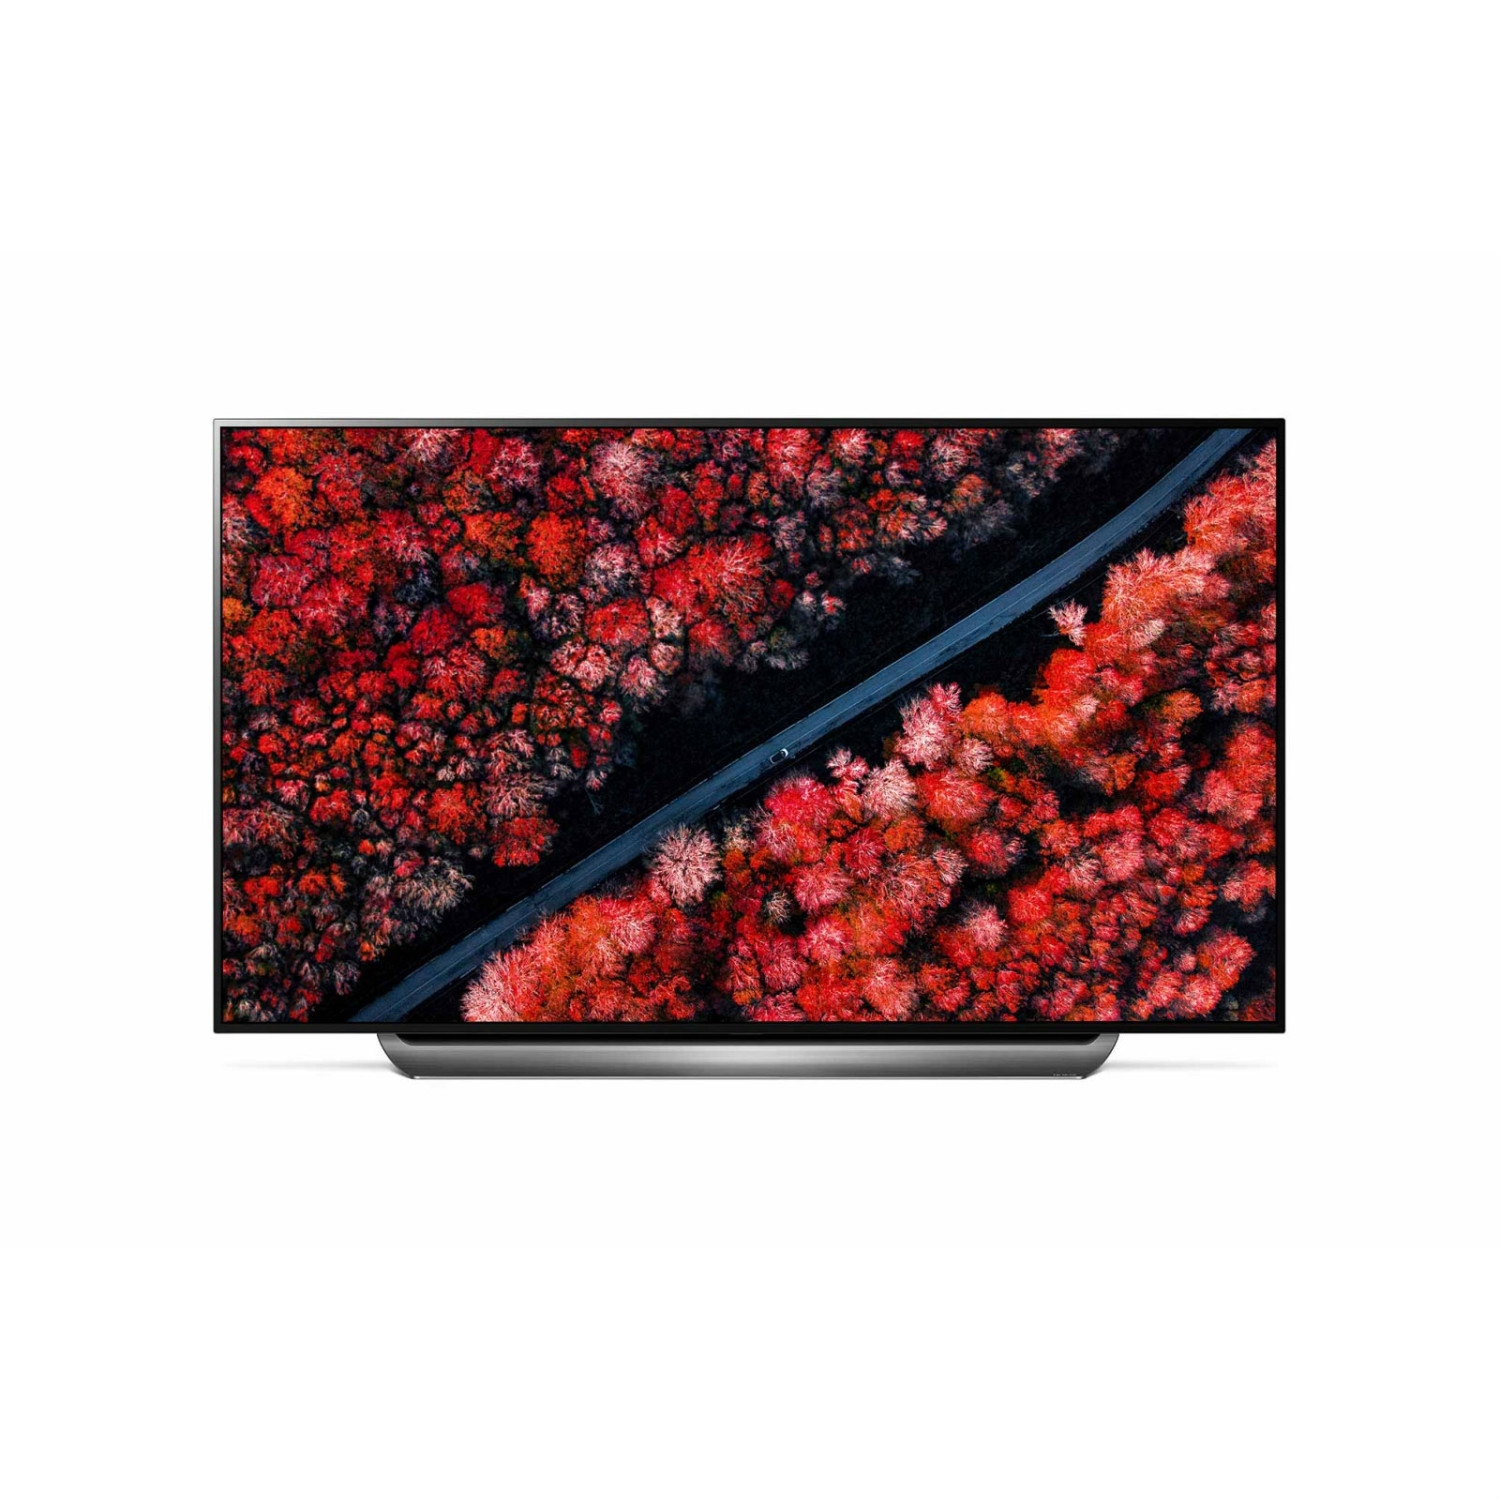 LG 77" OLED TV - SMART - webOs - Freeview HD - Freesat HD - INFINITE - Black - A Rated - 0